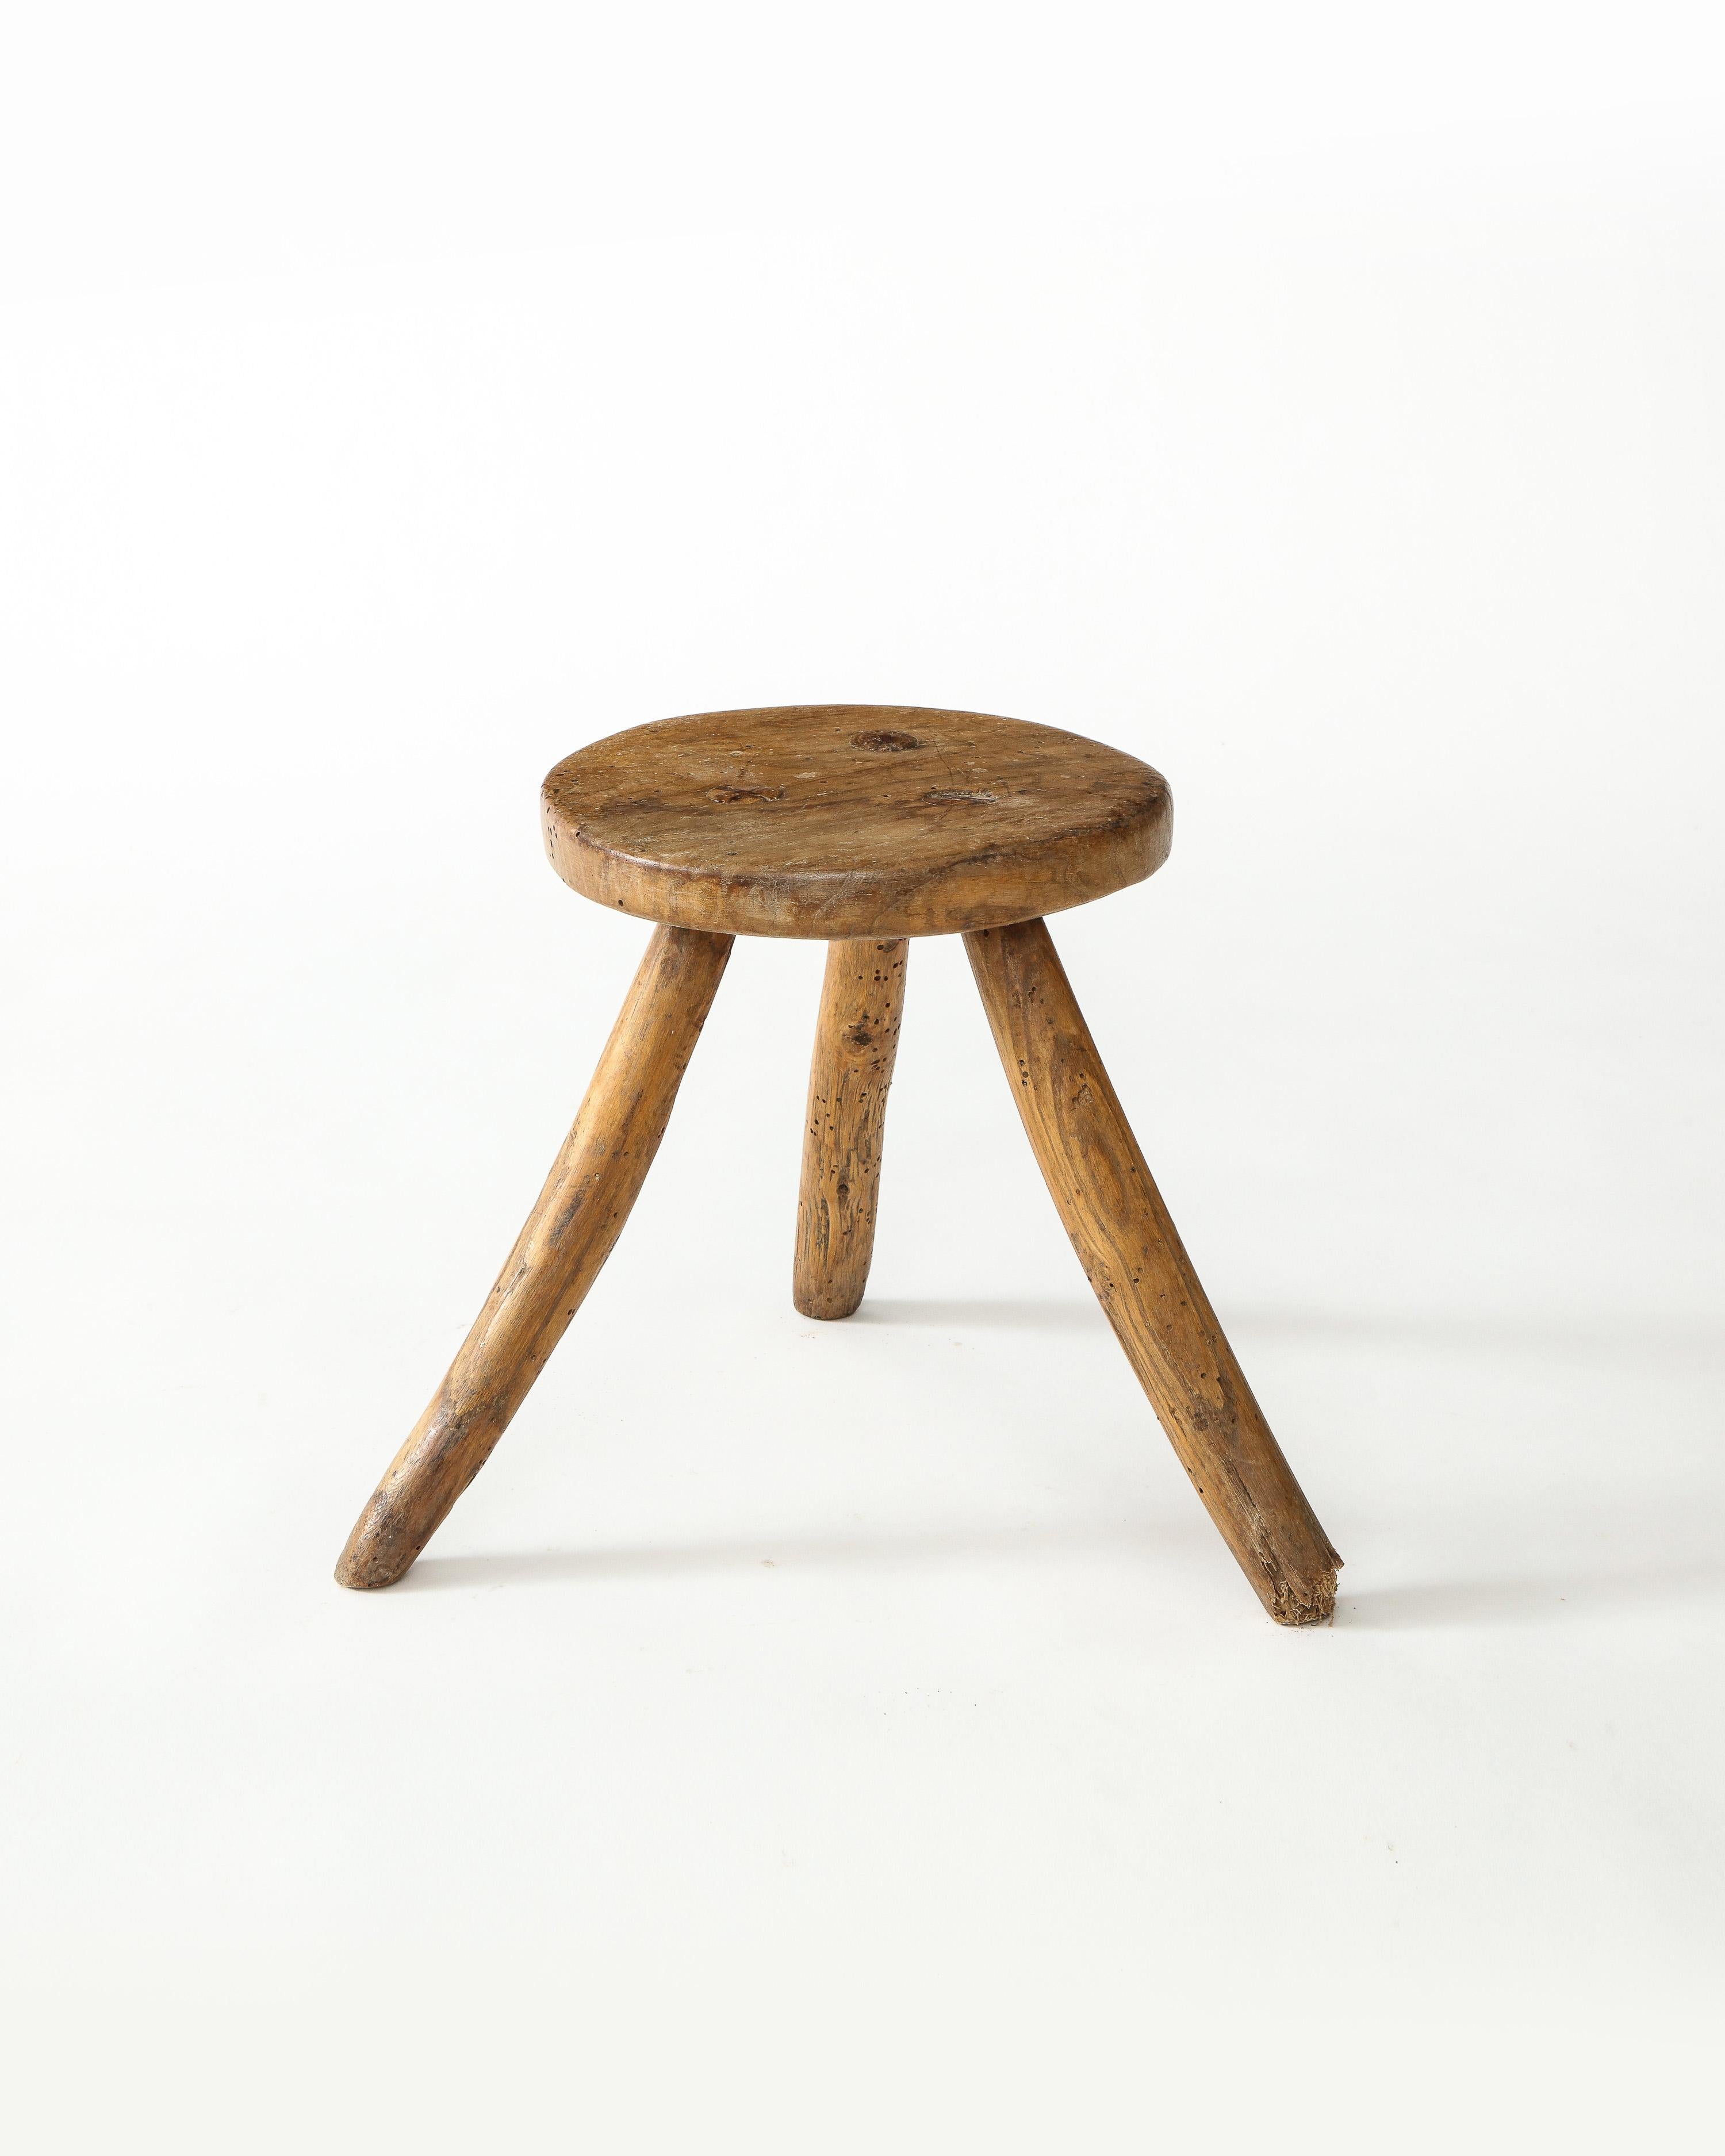 Primitive rustic solid wood three-legged stool, 1930s, Spain. Splayed leg stance.

Great character and patina. Handsome through-tenon detail.

Excellent as a small low side table.